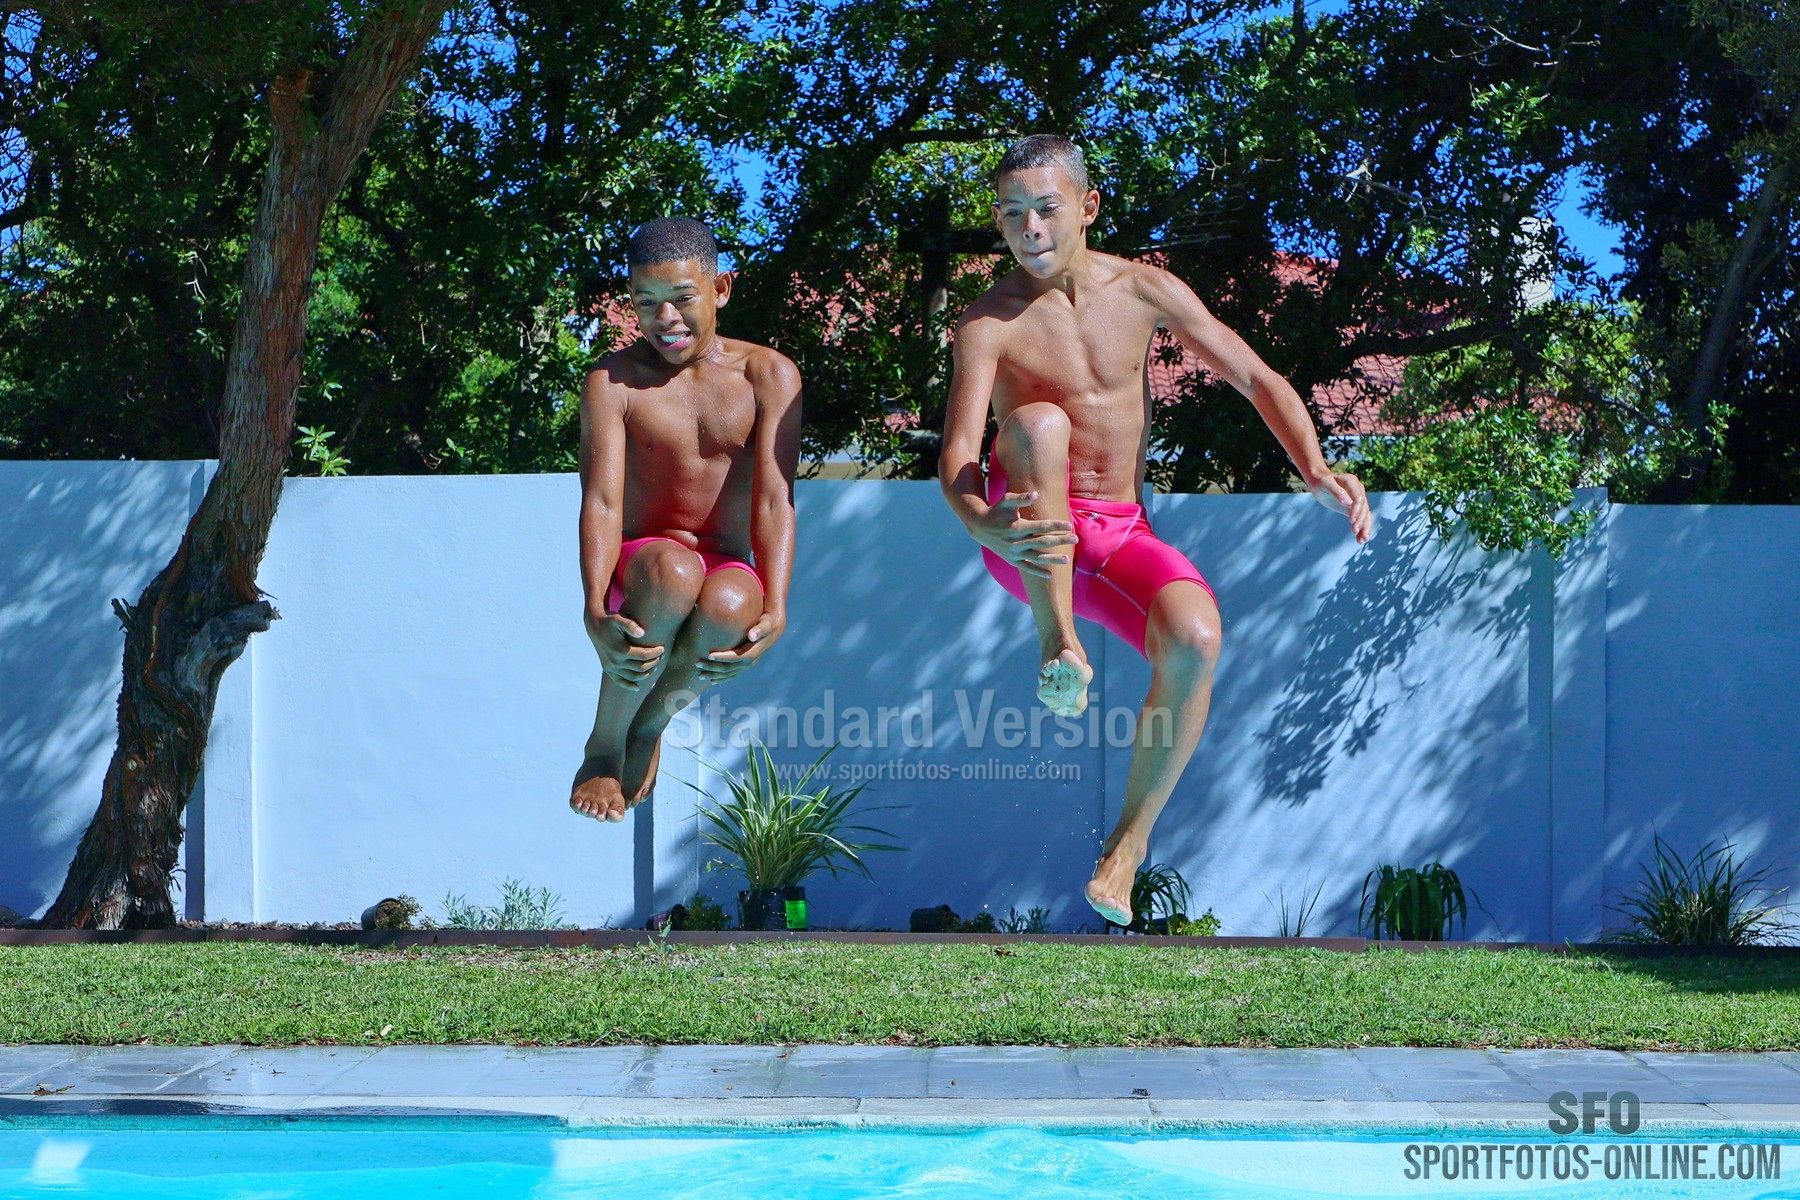 Sergio and Noah. Two boys at the pool.